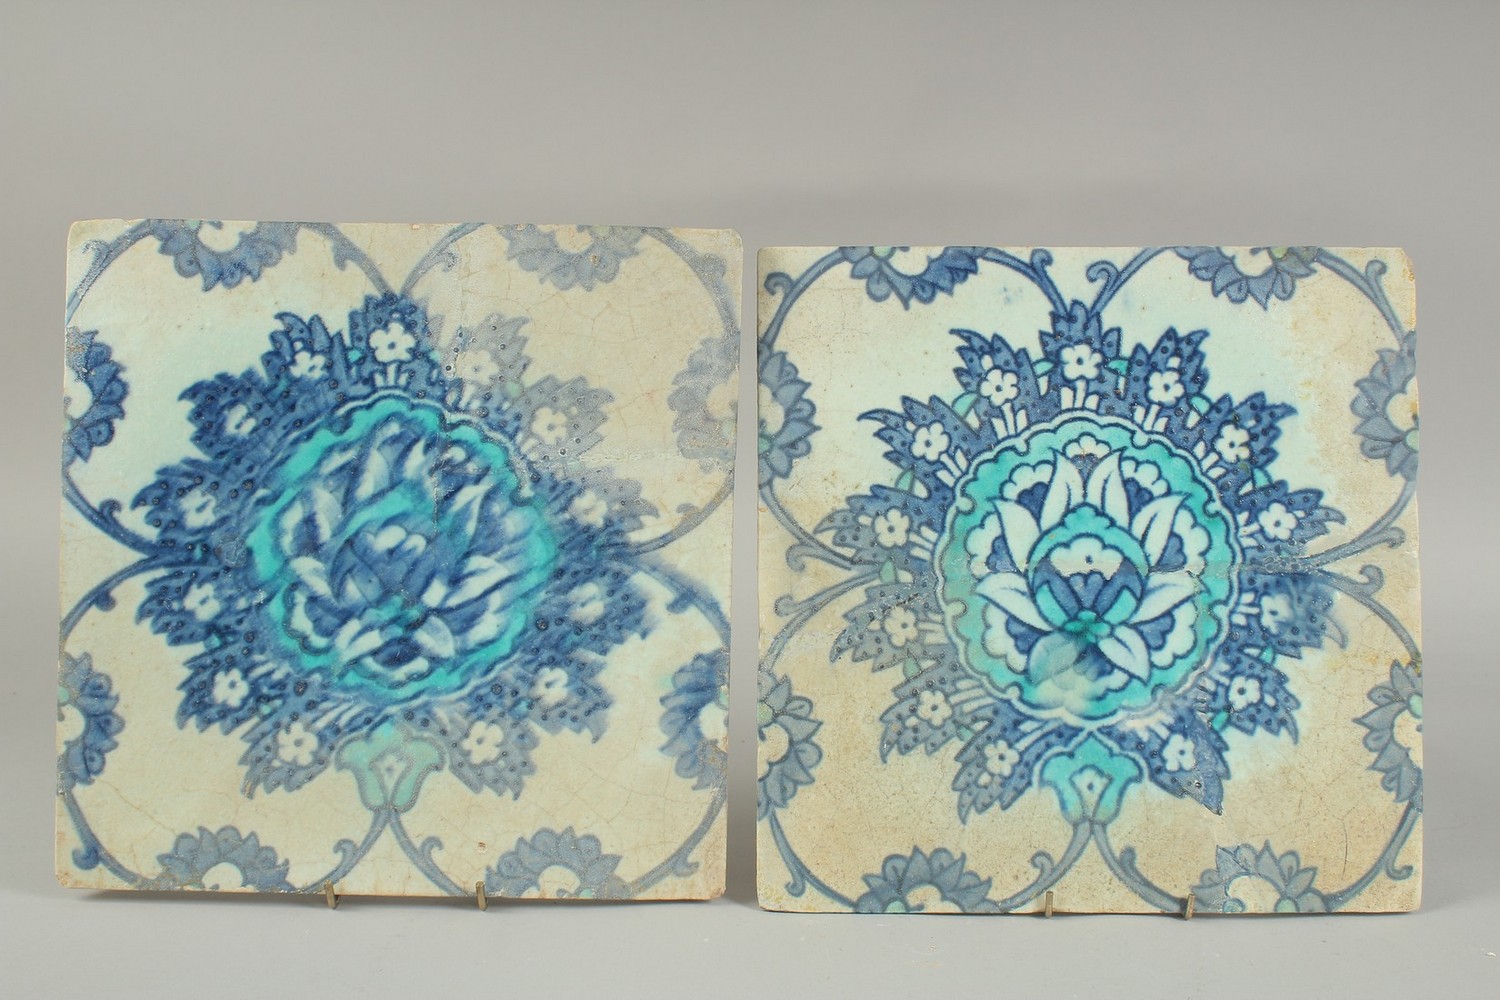 TWO EARLY 17TH CENTURY OTTOMAN IZNIK TILES, depicting a large lotus flower, (2).